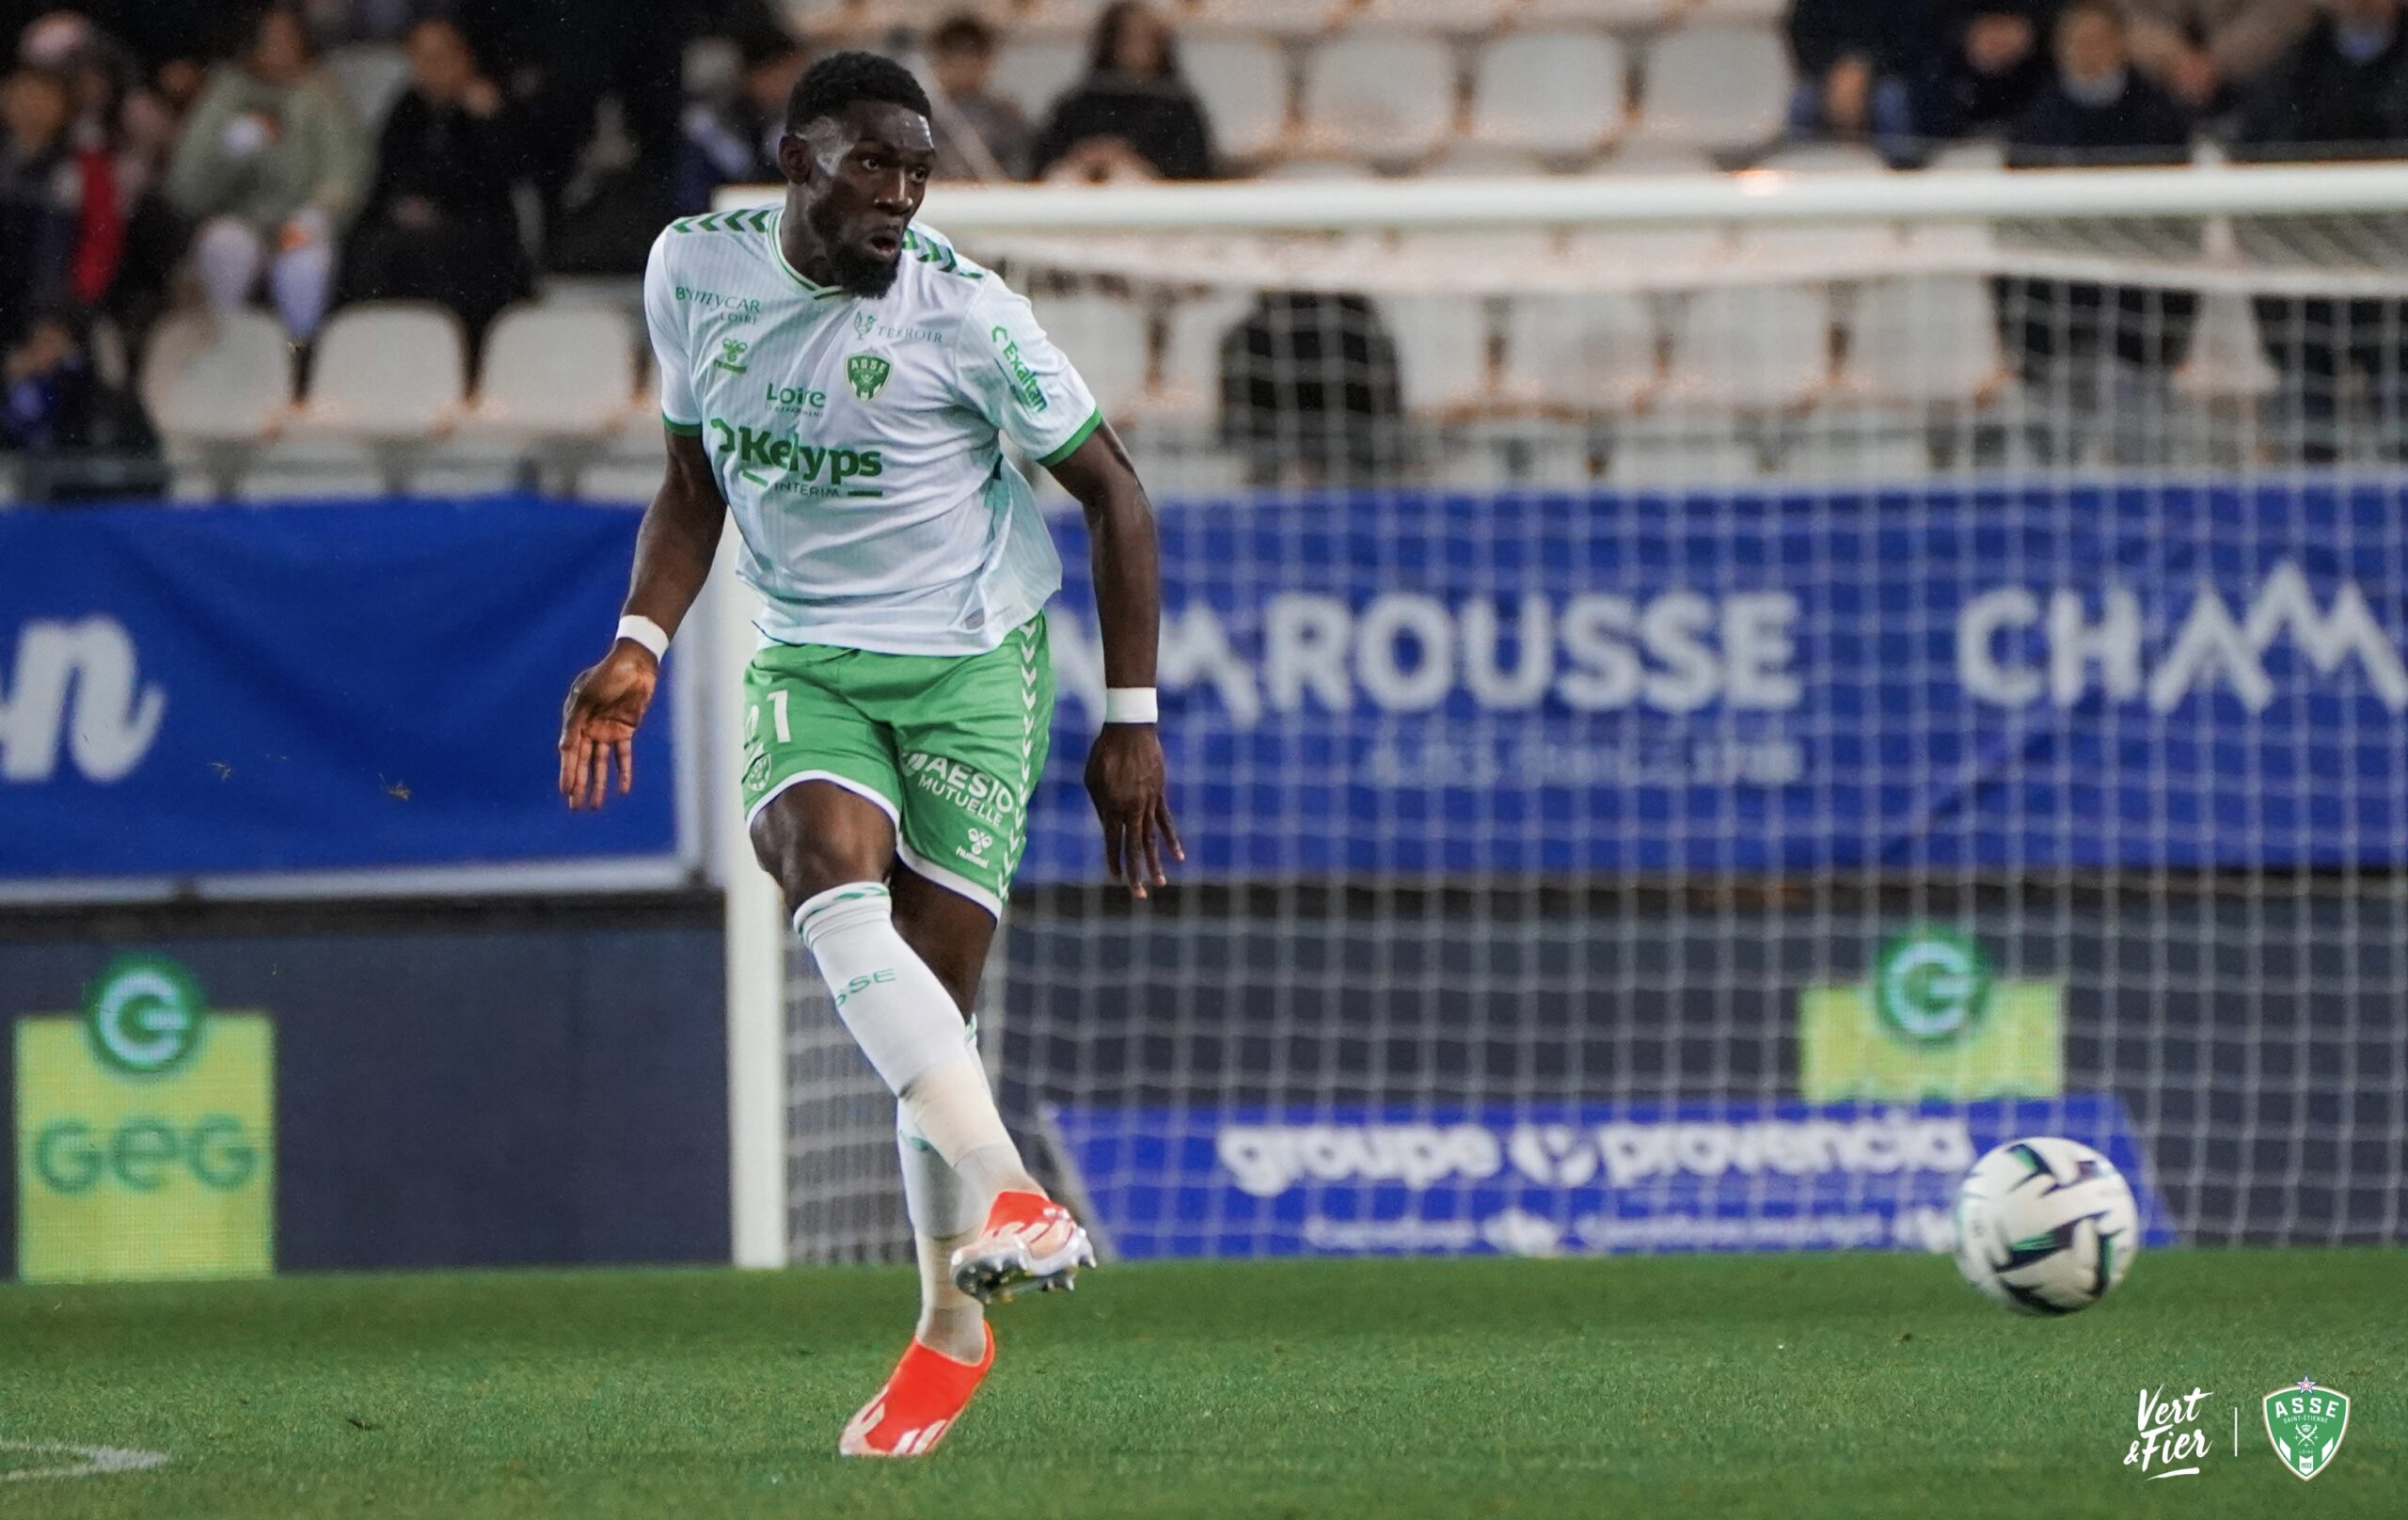 Ligue 2 Saint tienne Dylan Batubinsika guides Les Verts to victory over Grenoble